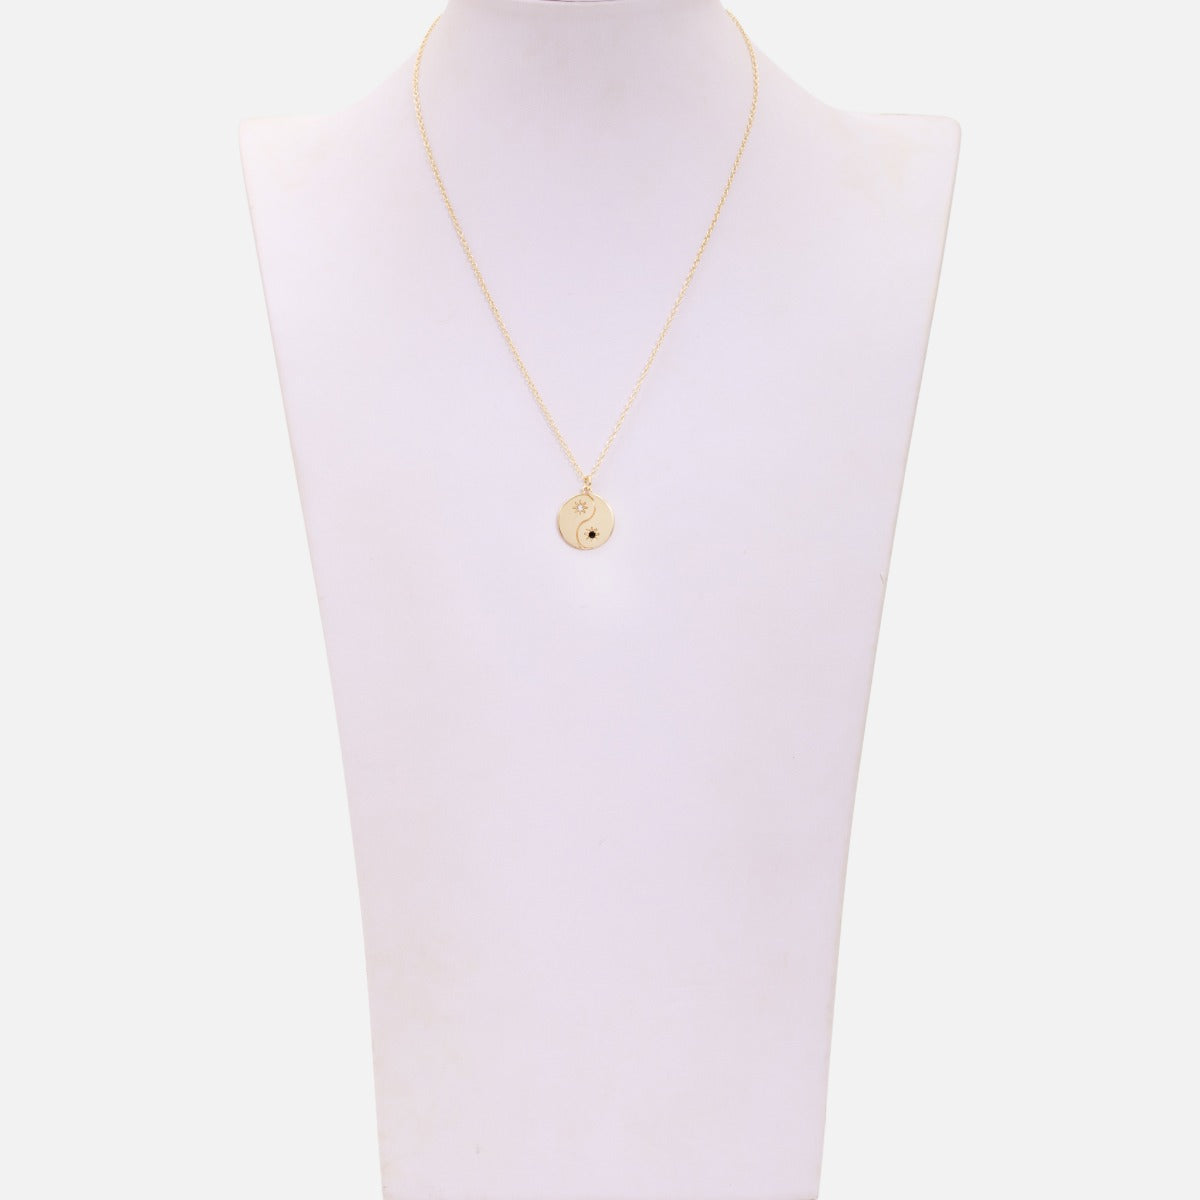 Golden necklace with yin yang charm